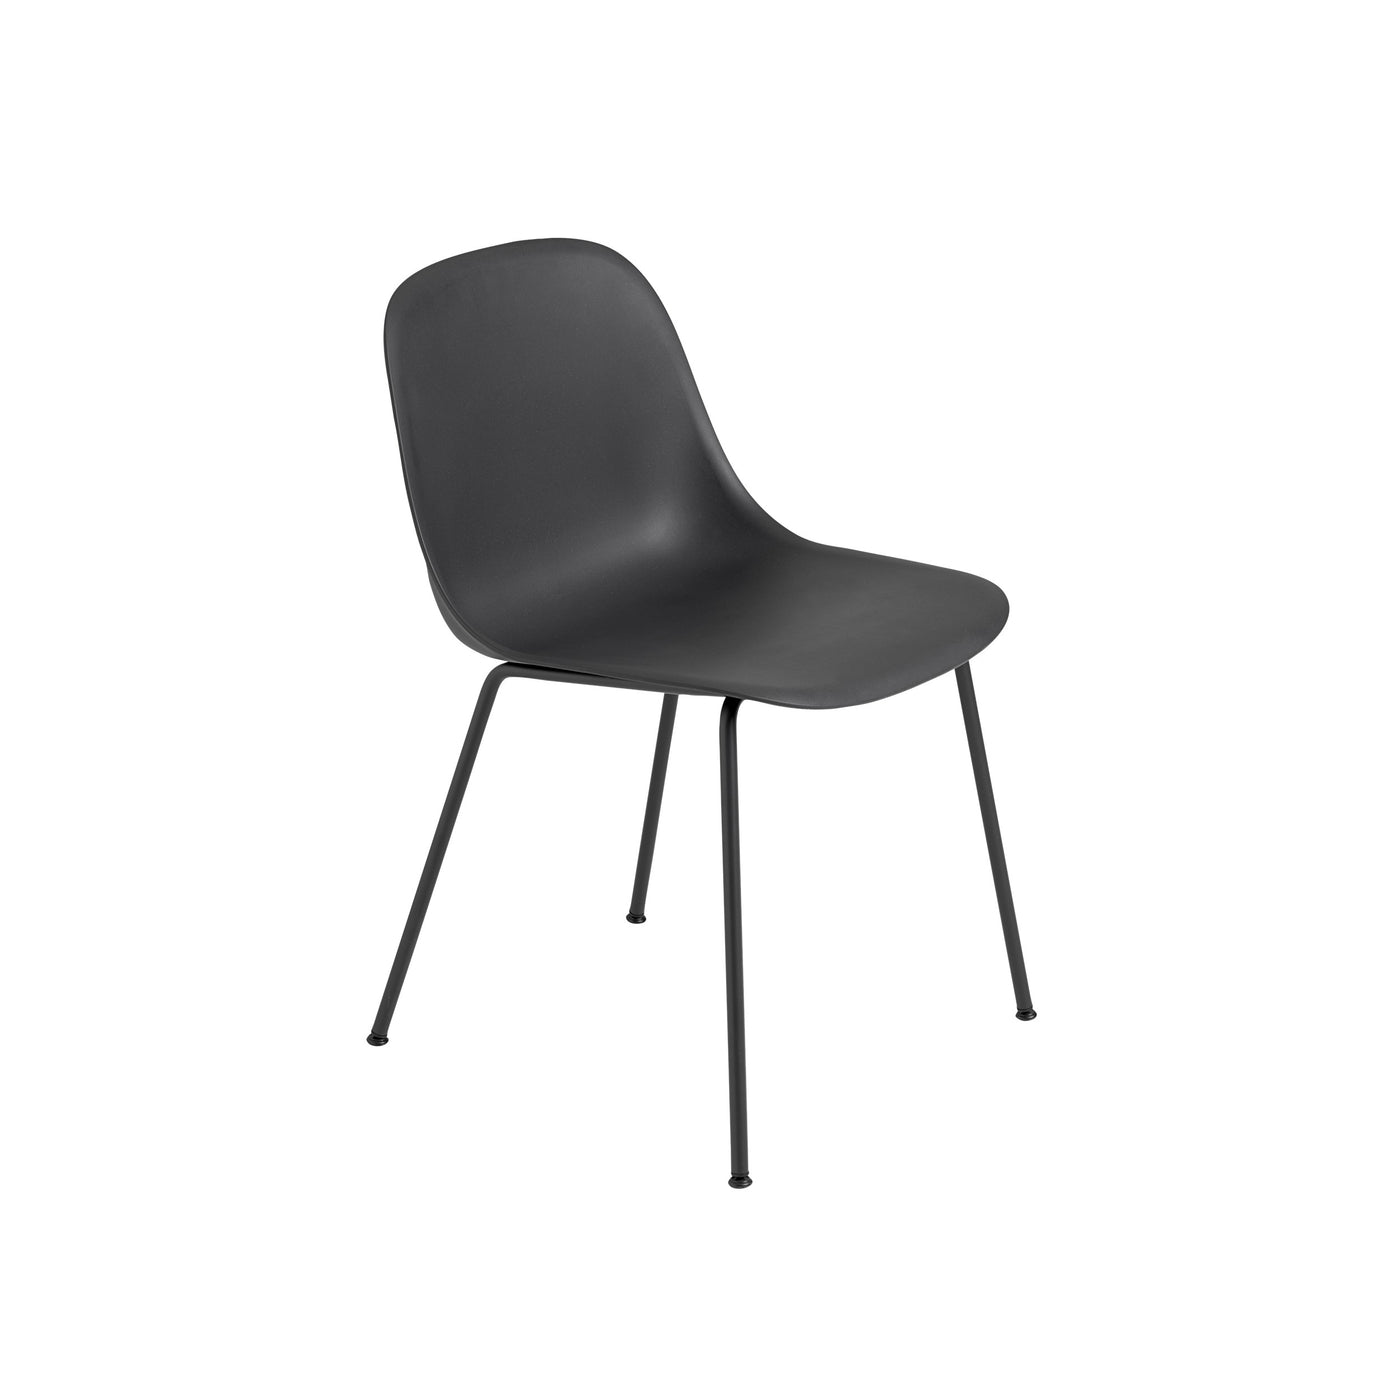 Muuto Fiber Side Chair Tube Base, black seat and legs. Available from someday designs . #colour_black